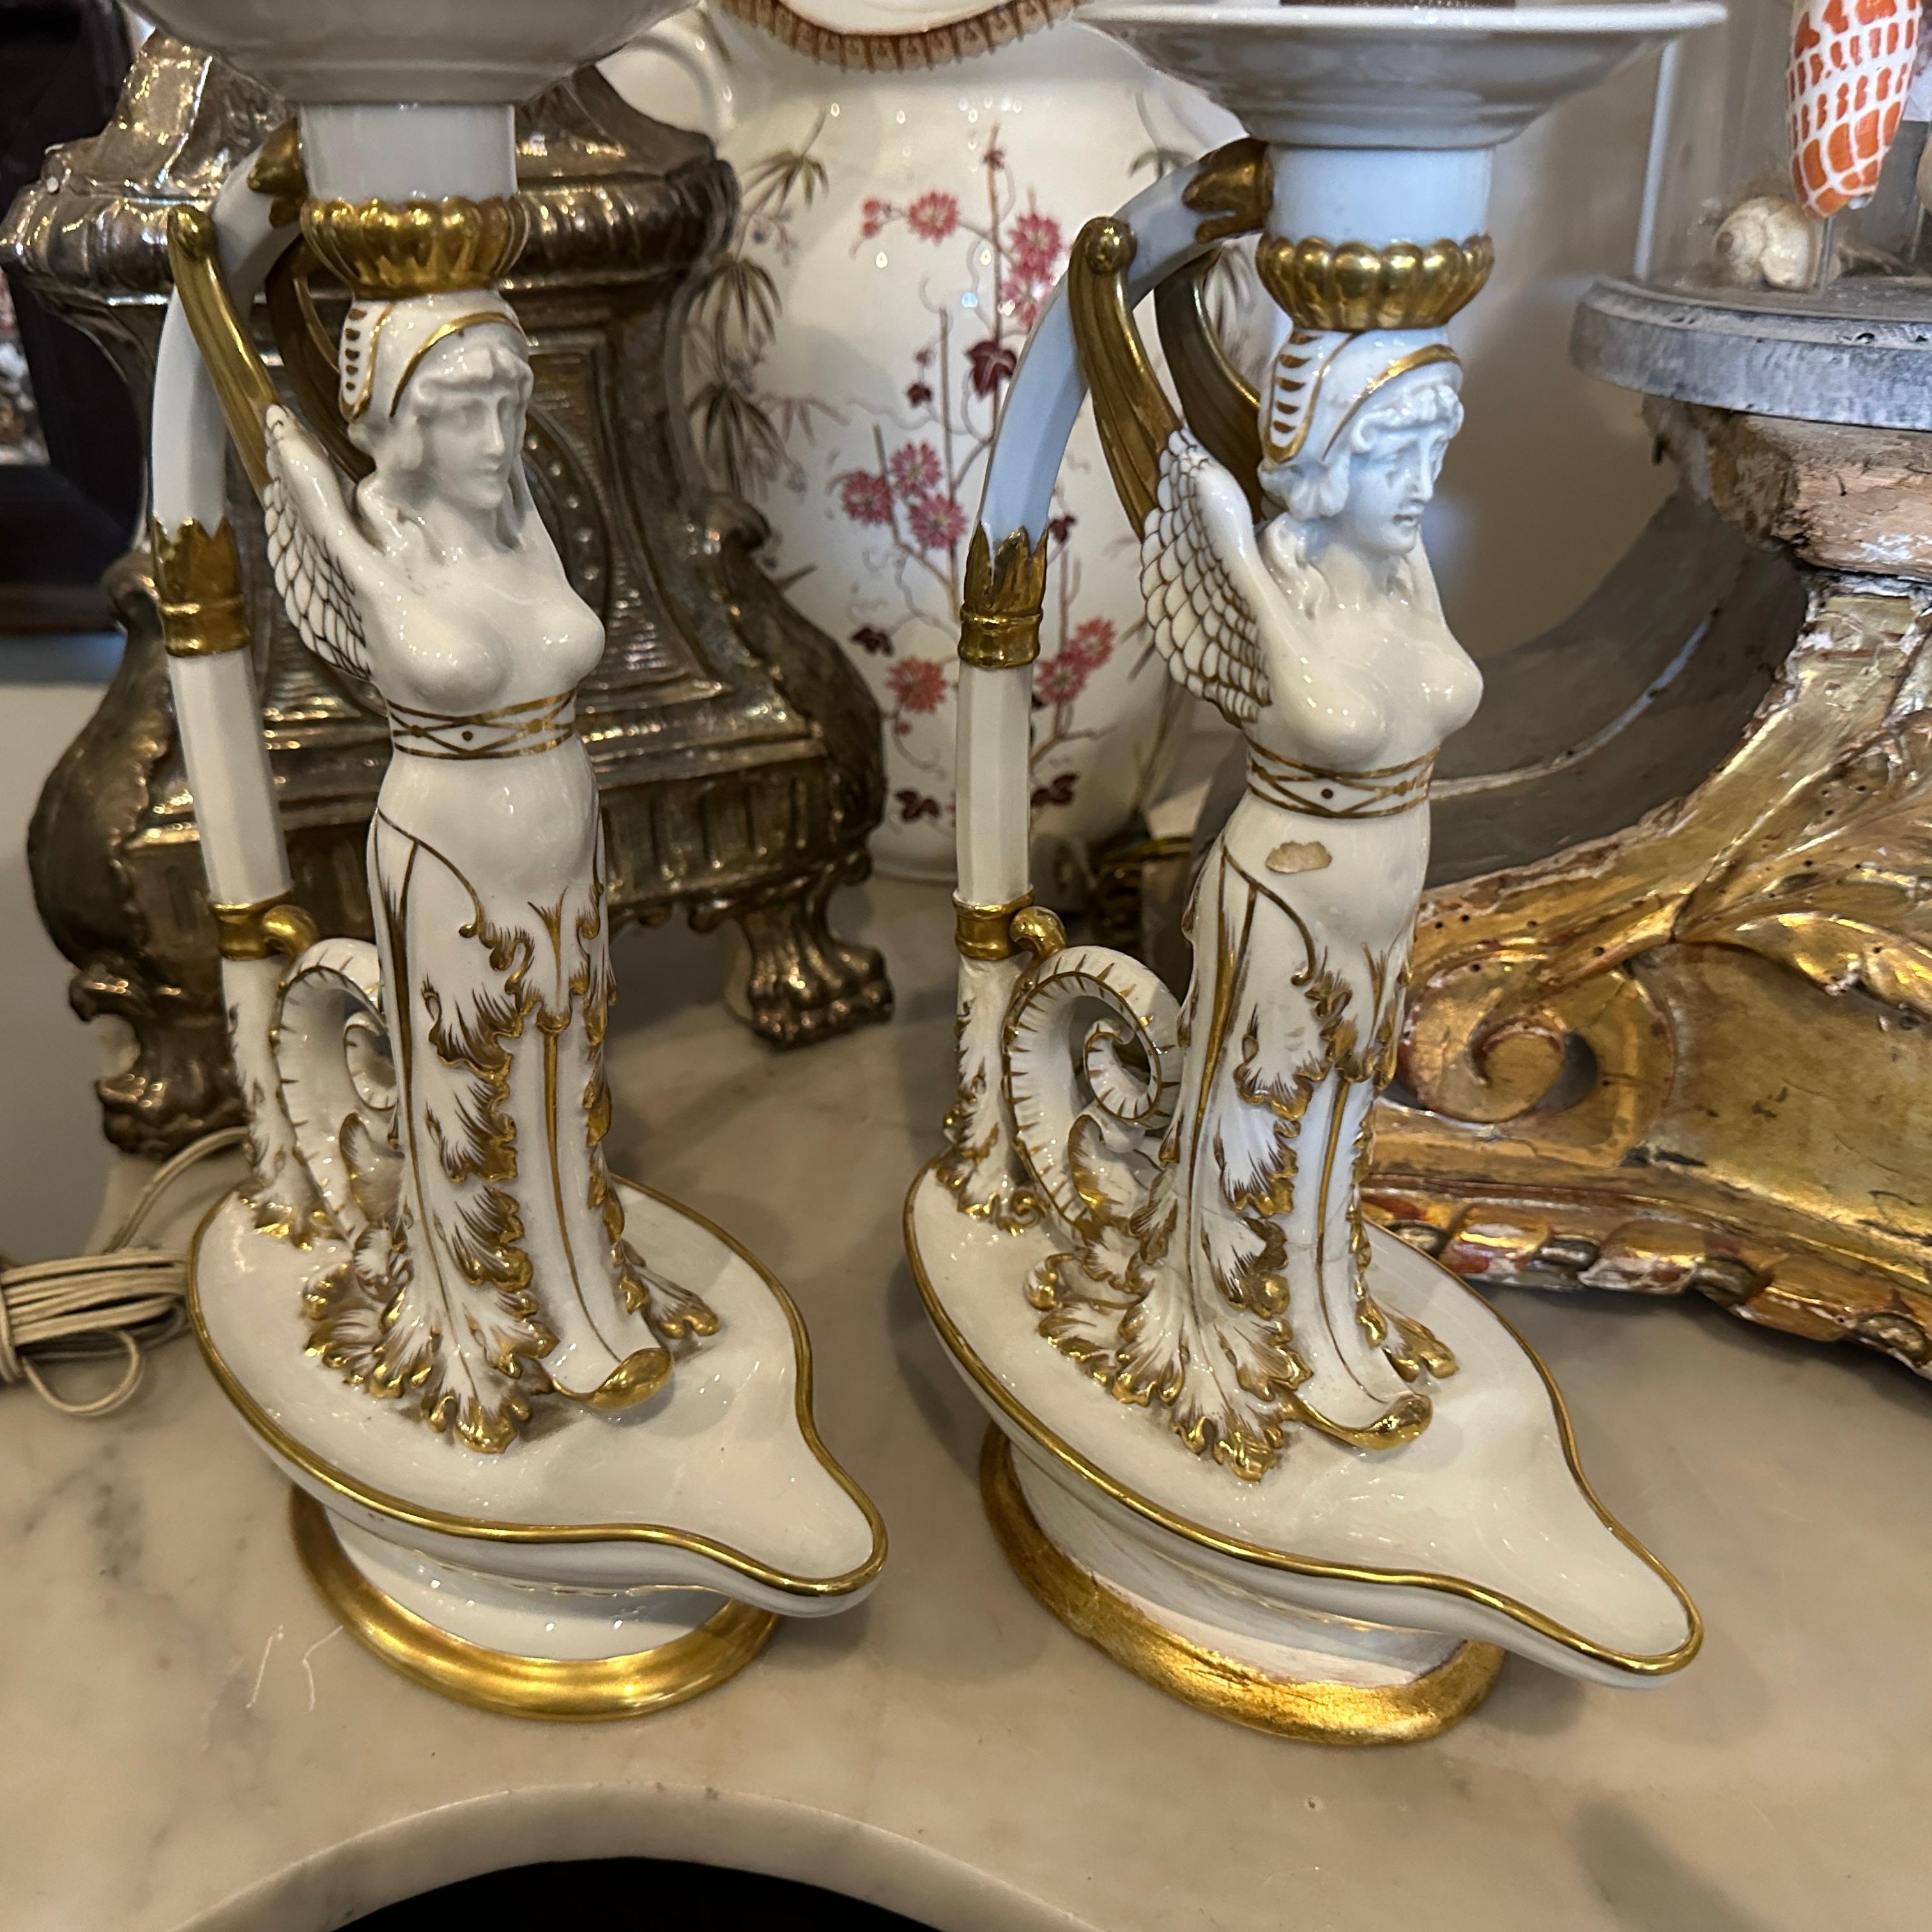 1900s Set of Two Neoclassical White and Gold Capodimonte Porcelain Table Lamps For Sale 1